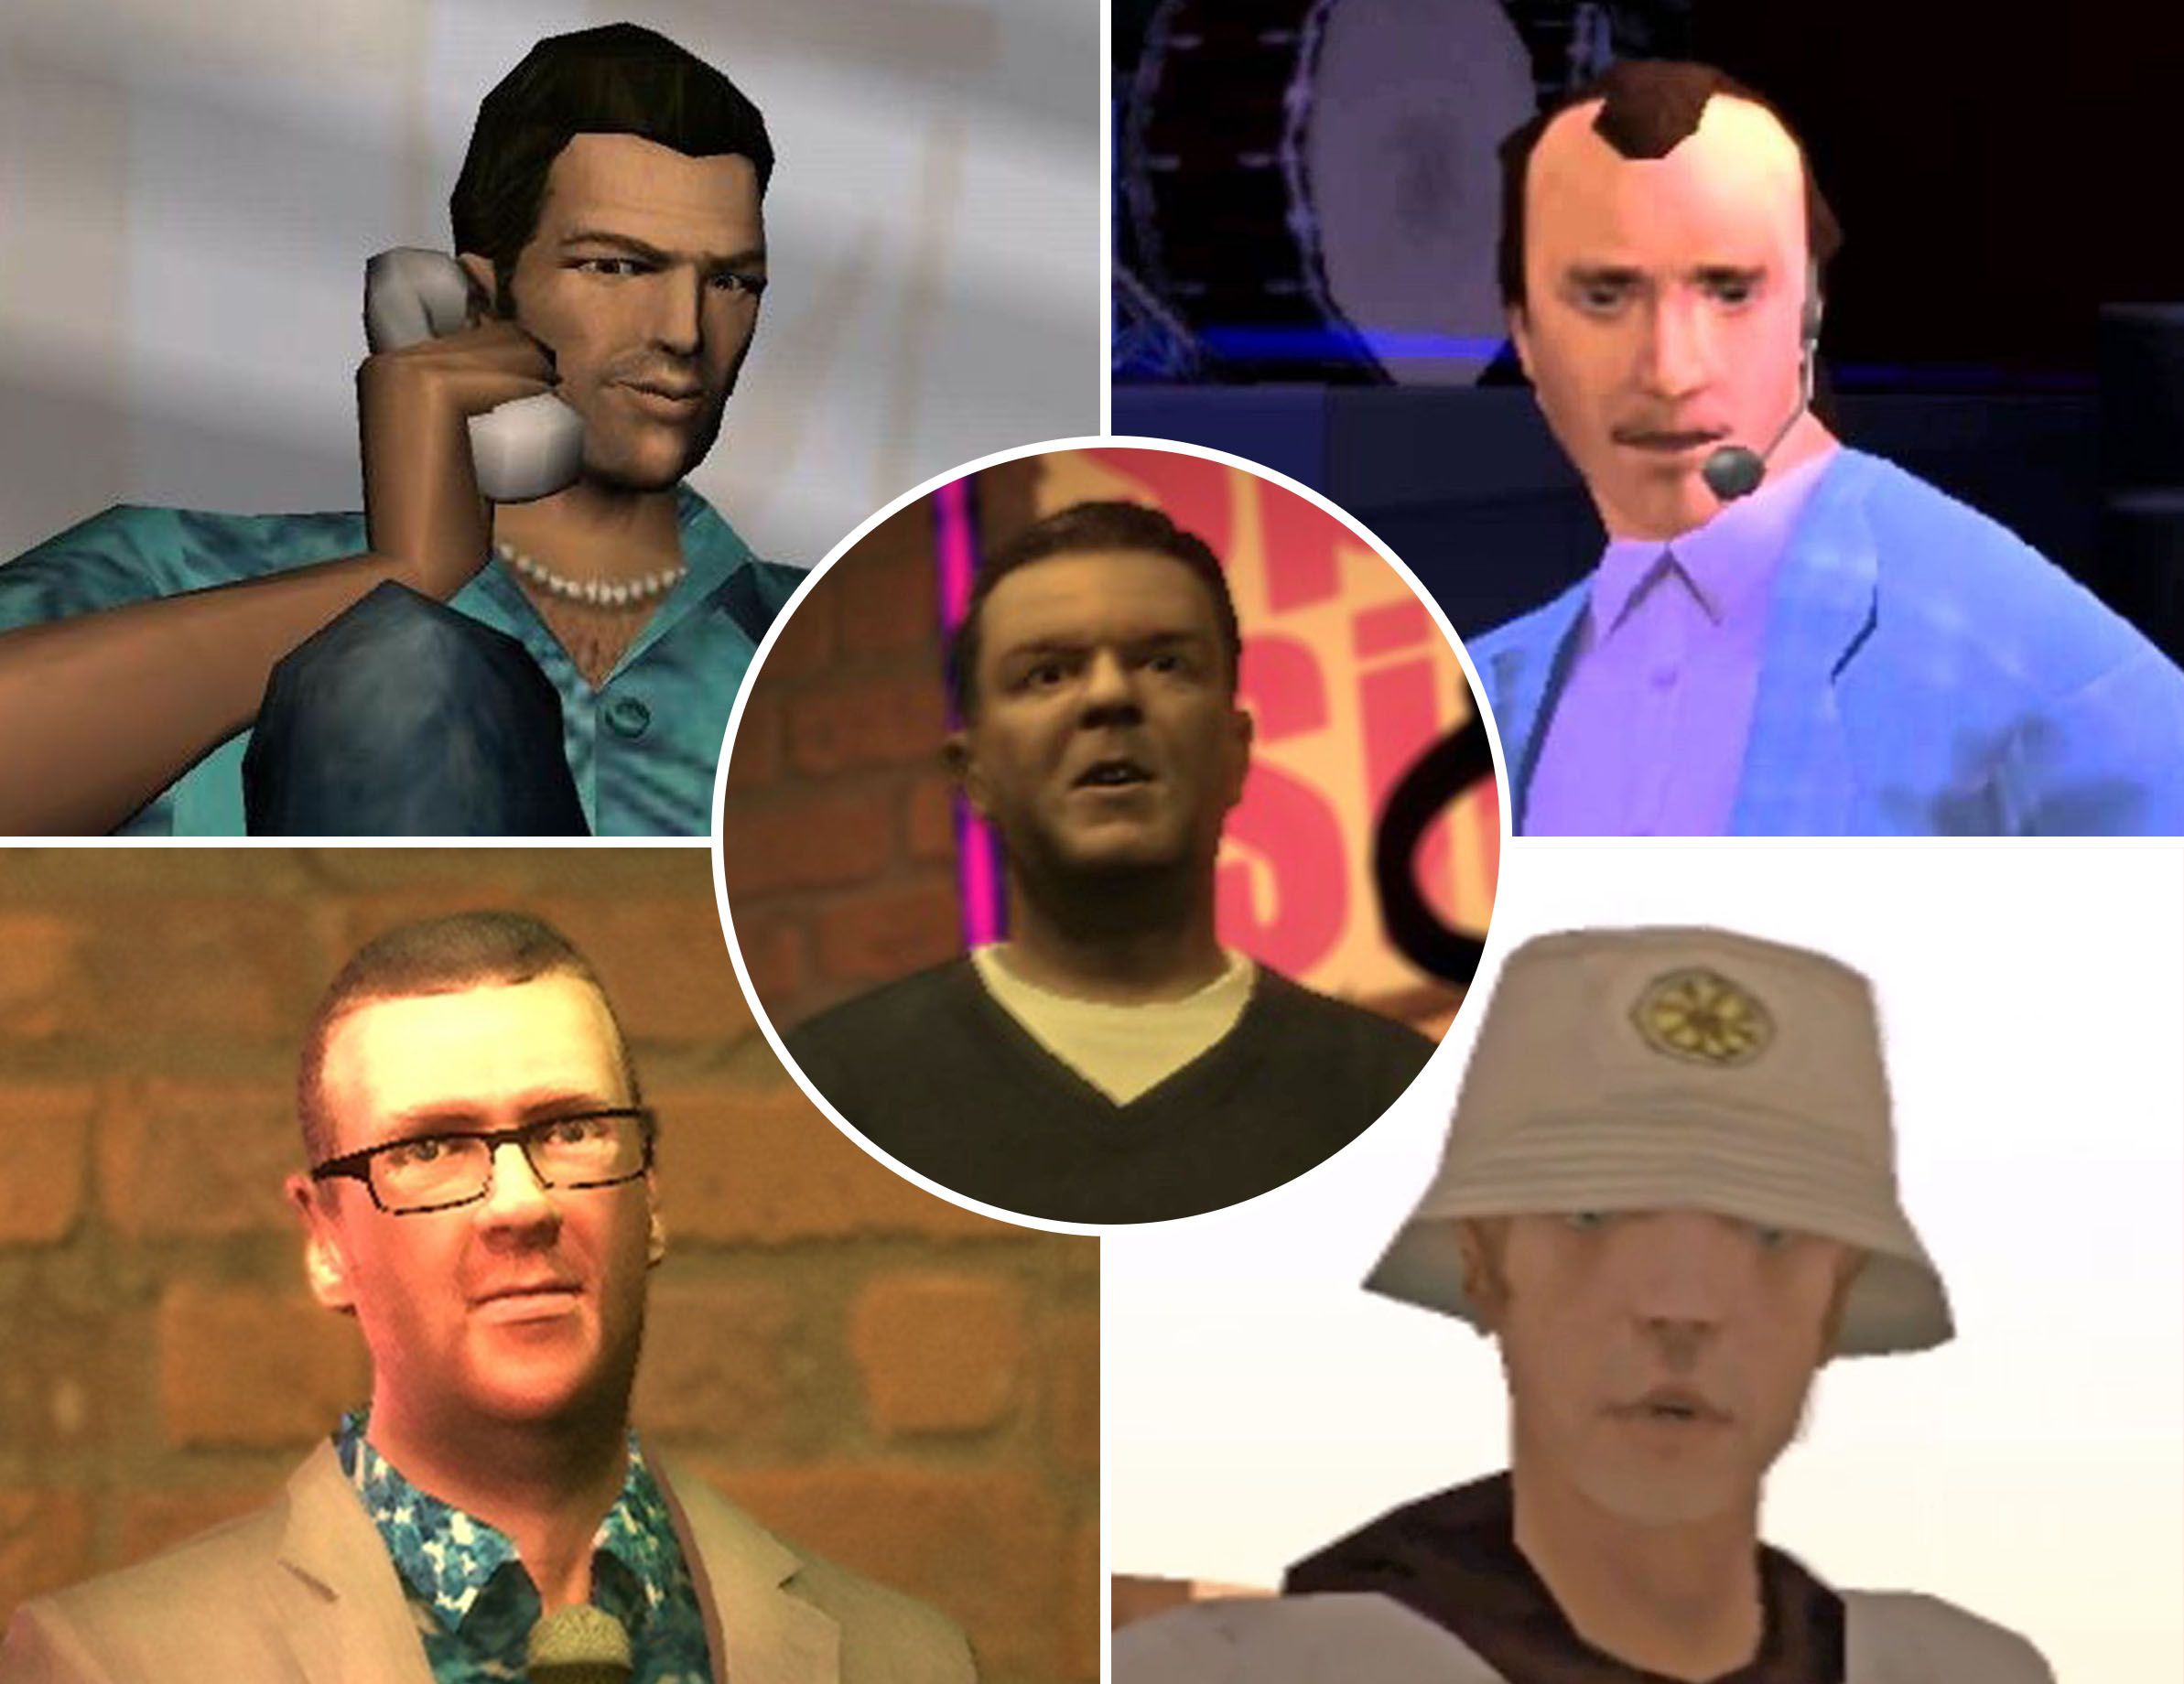 grand theft auto iv characters